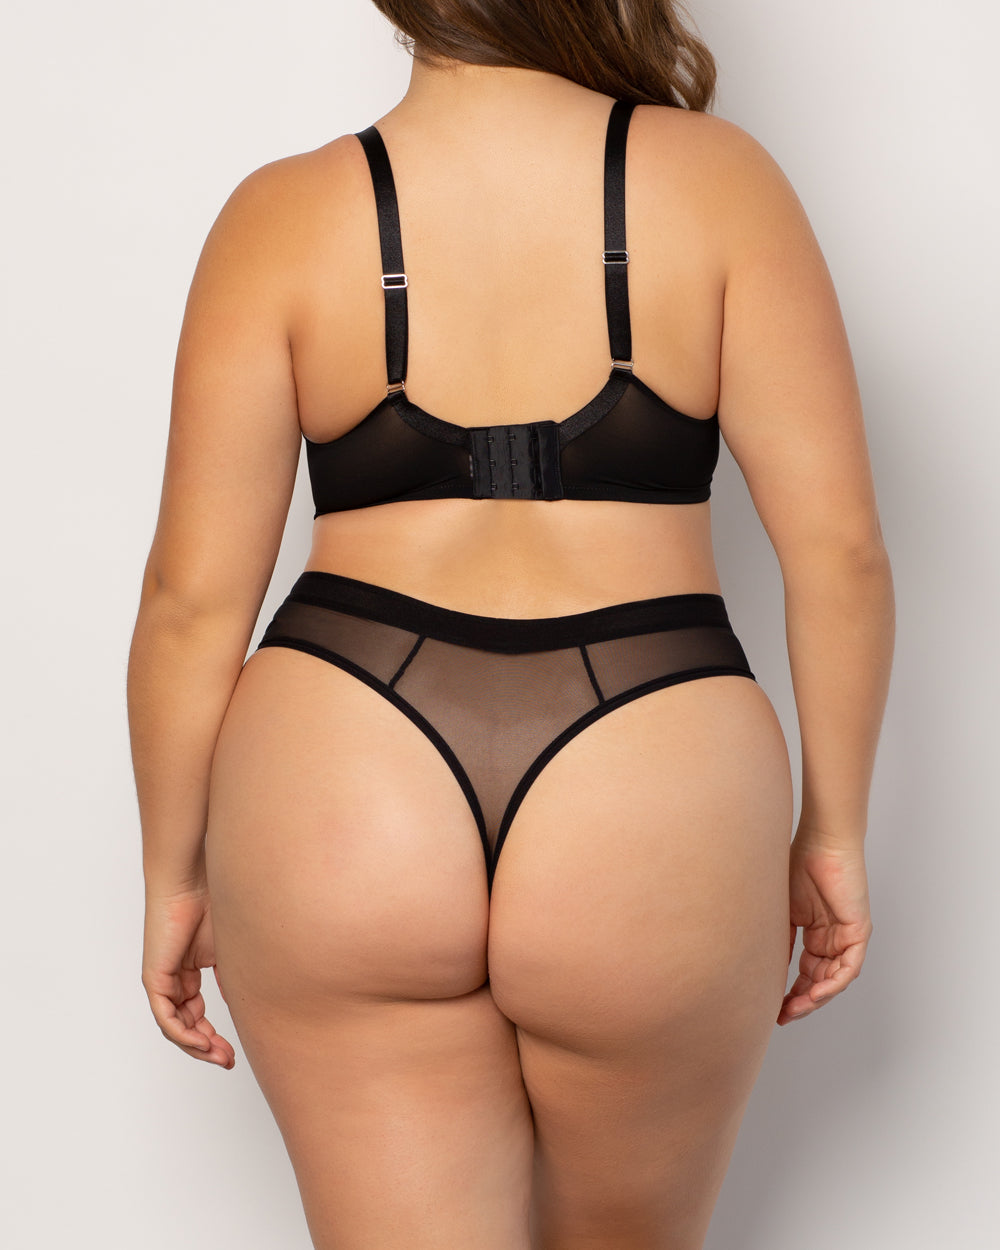 christina derose recommends thick girls in thongs pic